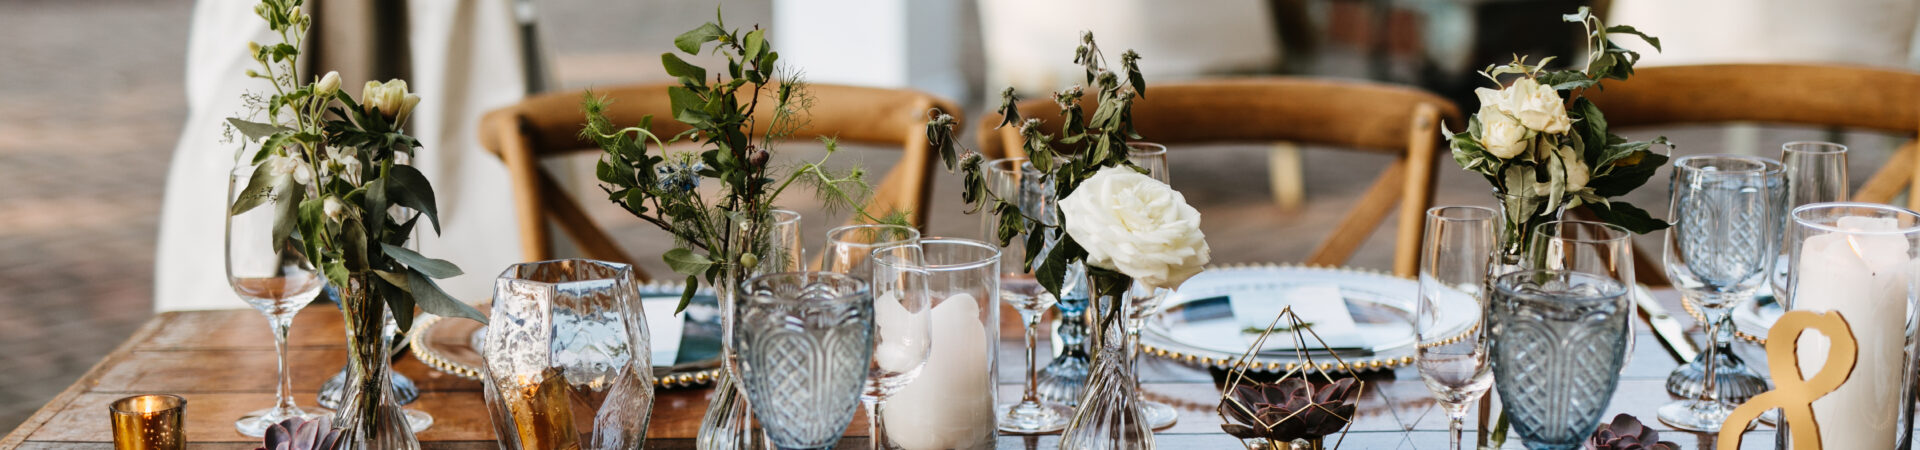 how to become a wedding planner